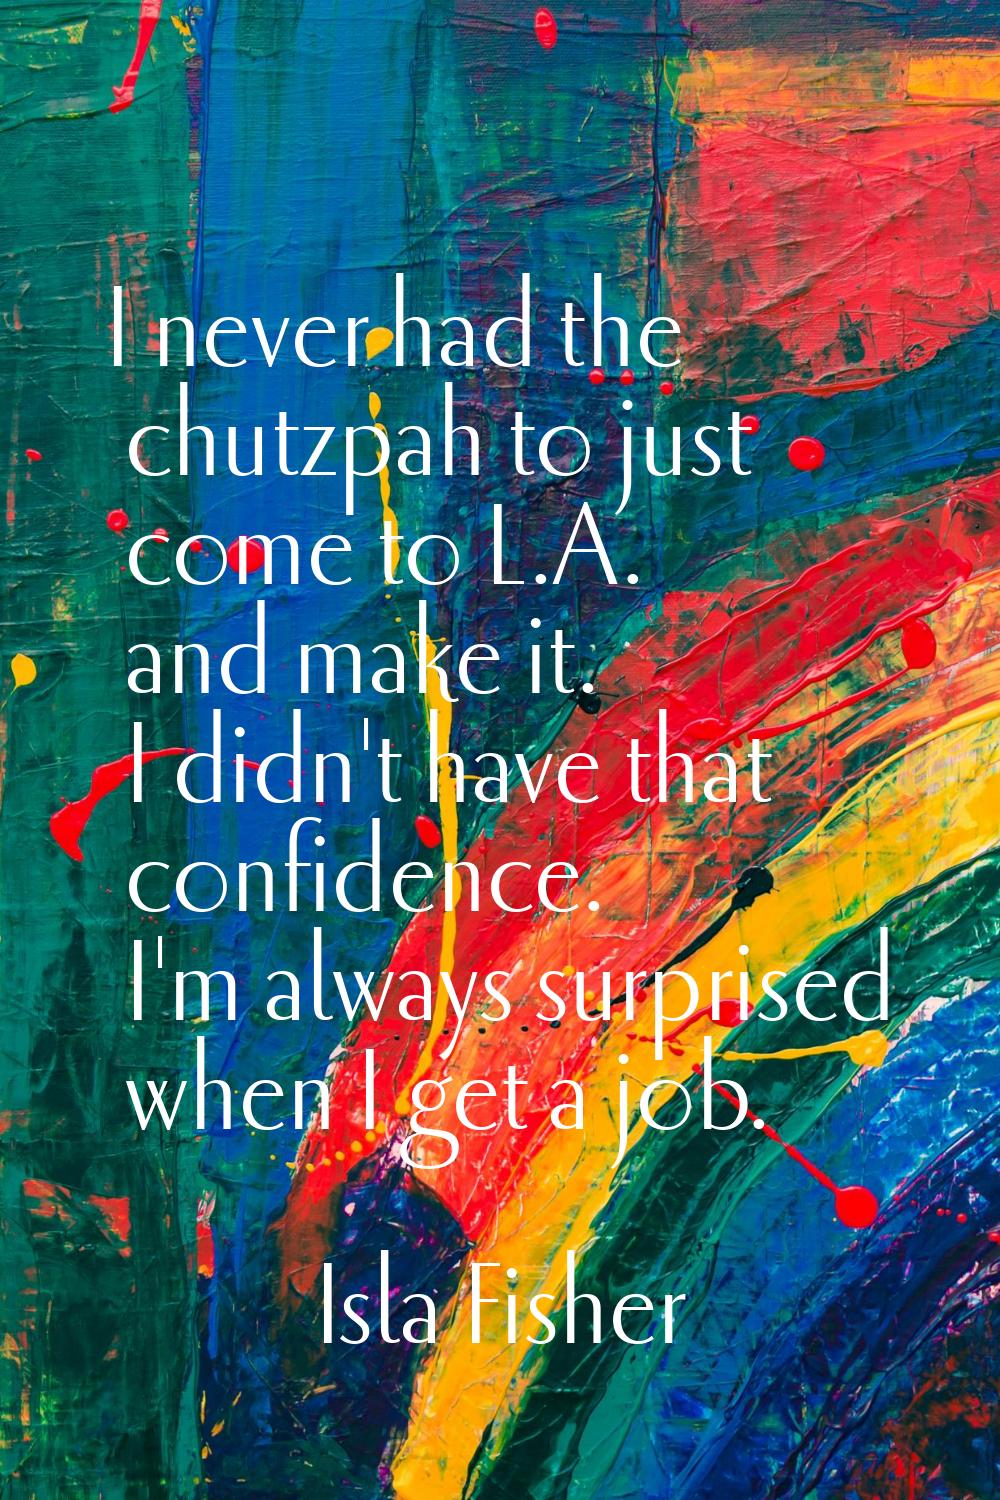 I never had the chutzpah to just come to L.A. and make it. I didn't have that confidence. I'm alway